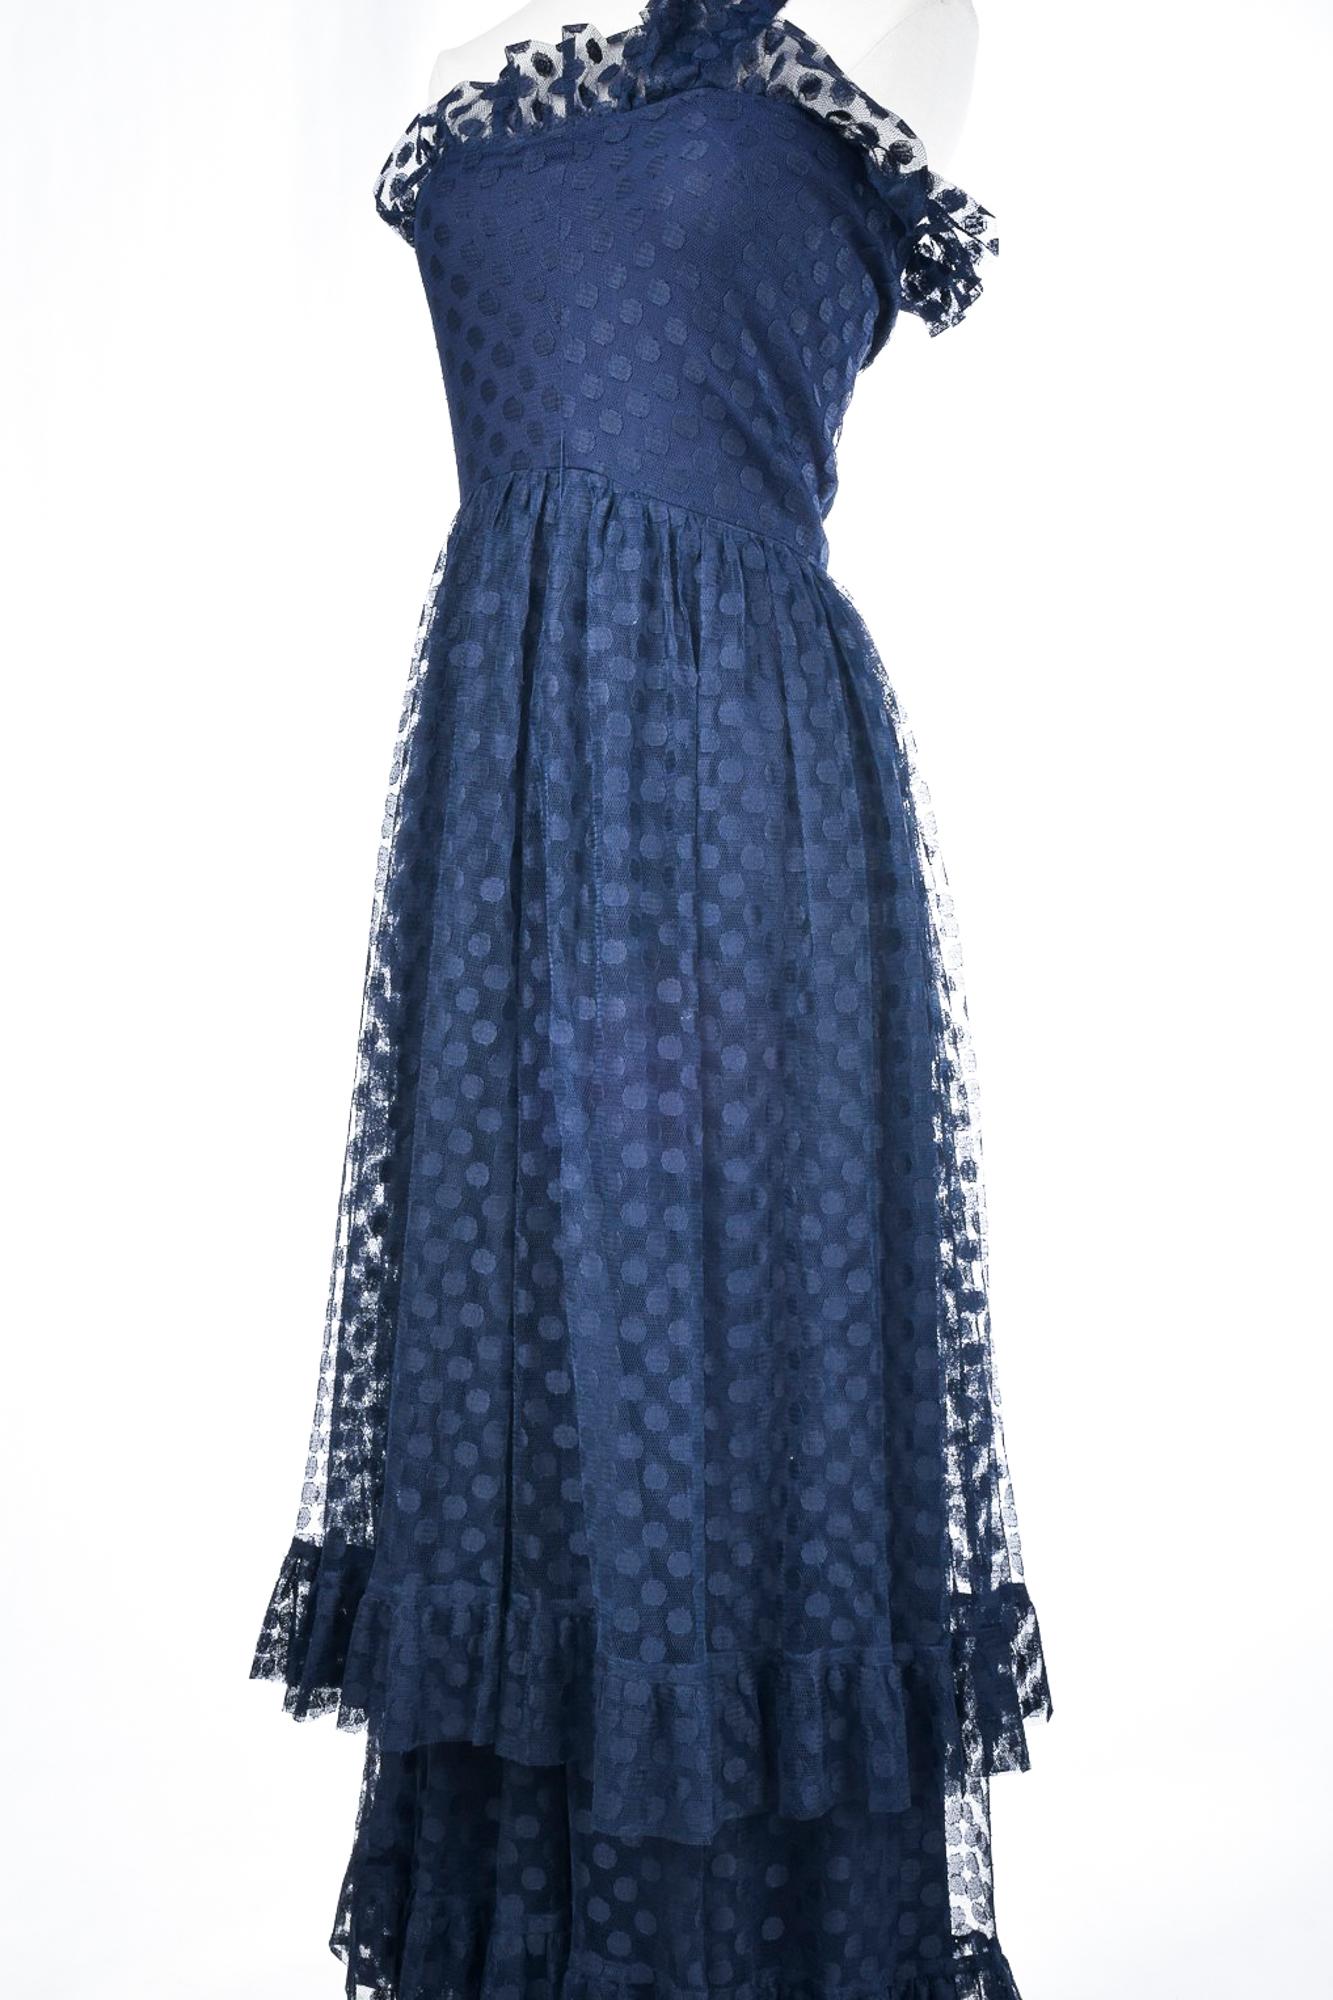 Circa 1980

France

Beautiful evening dress in navy blue Polyamide tulle with polka dots by Sherrer Boutique Paris numbered A13862 dating from the beginning of the Prêt-à-porter of the famous House. Asymmetrical long dress, curved bustier with large